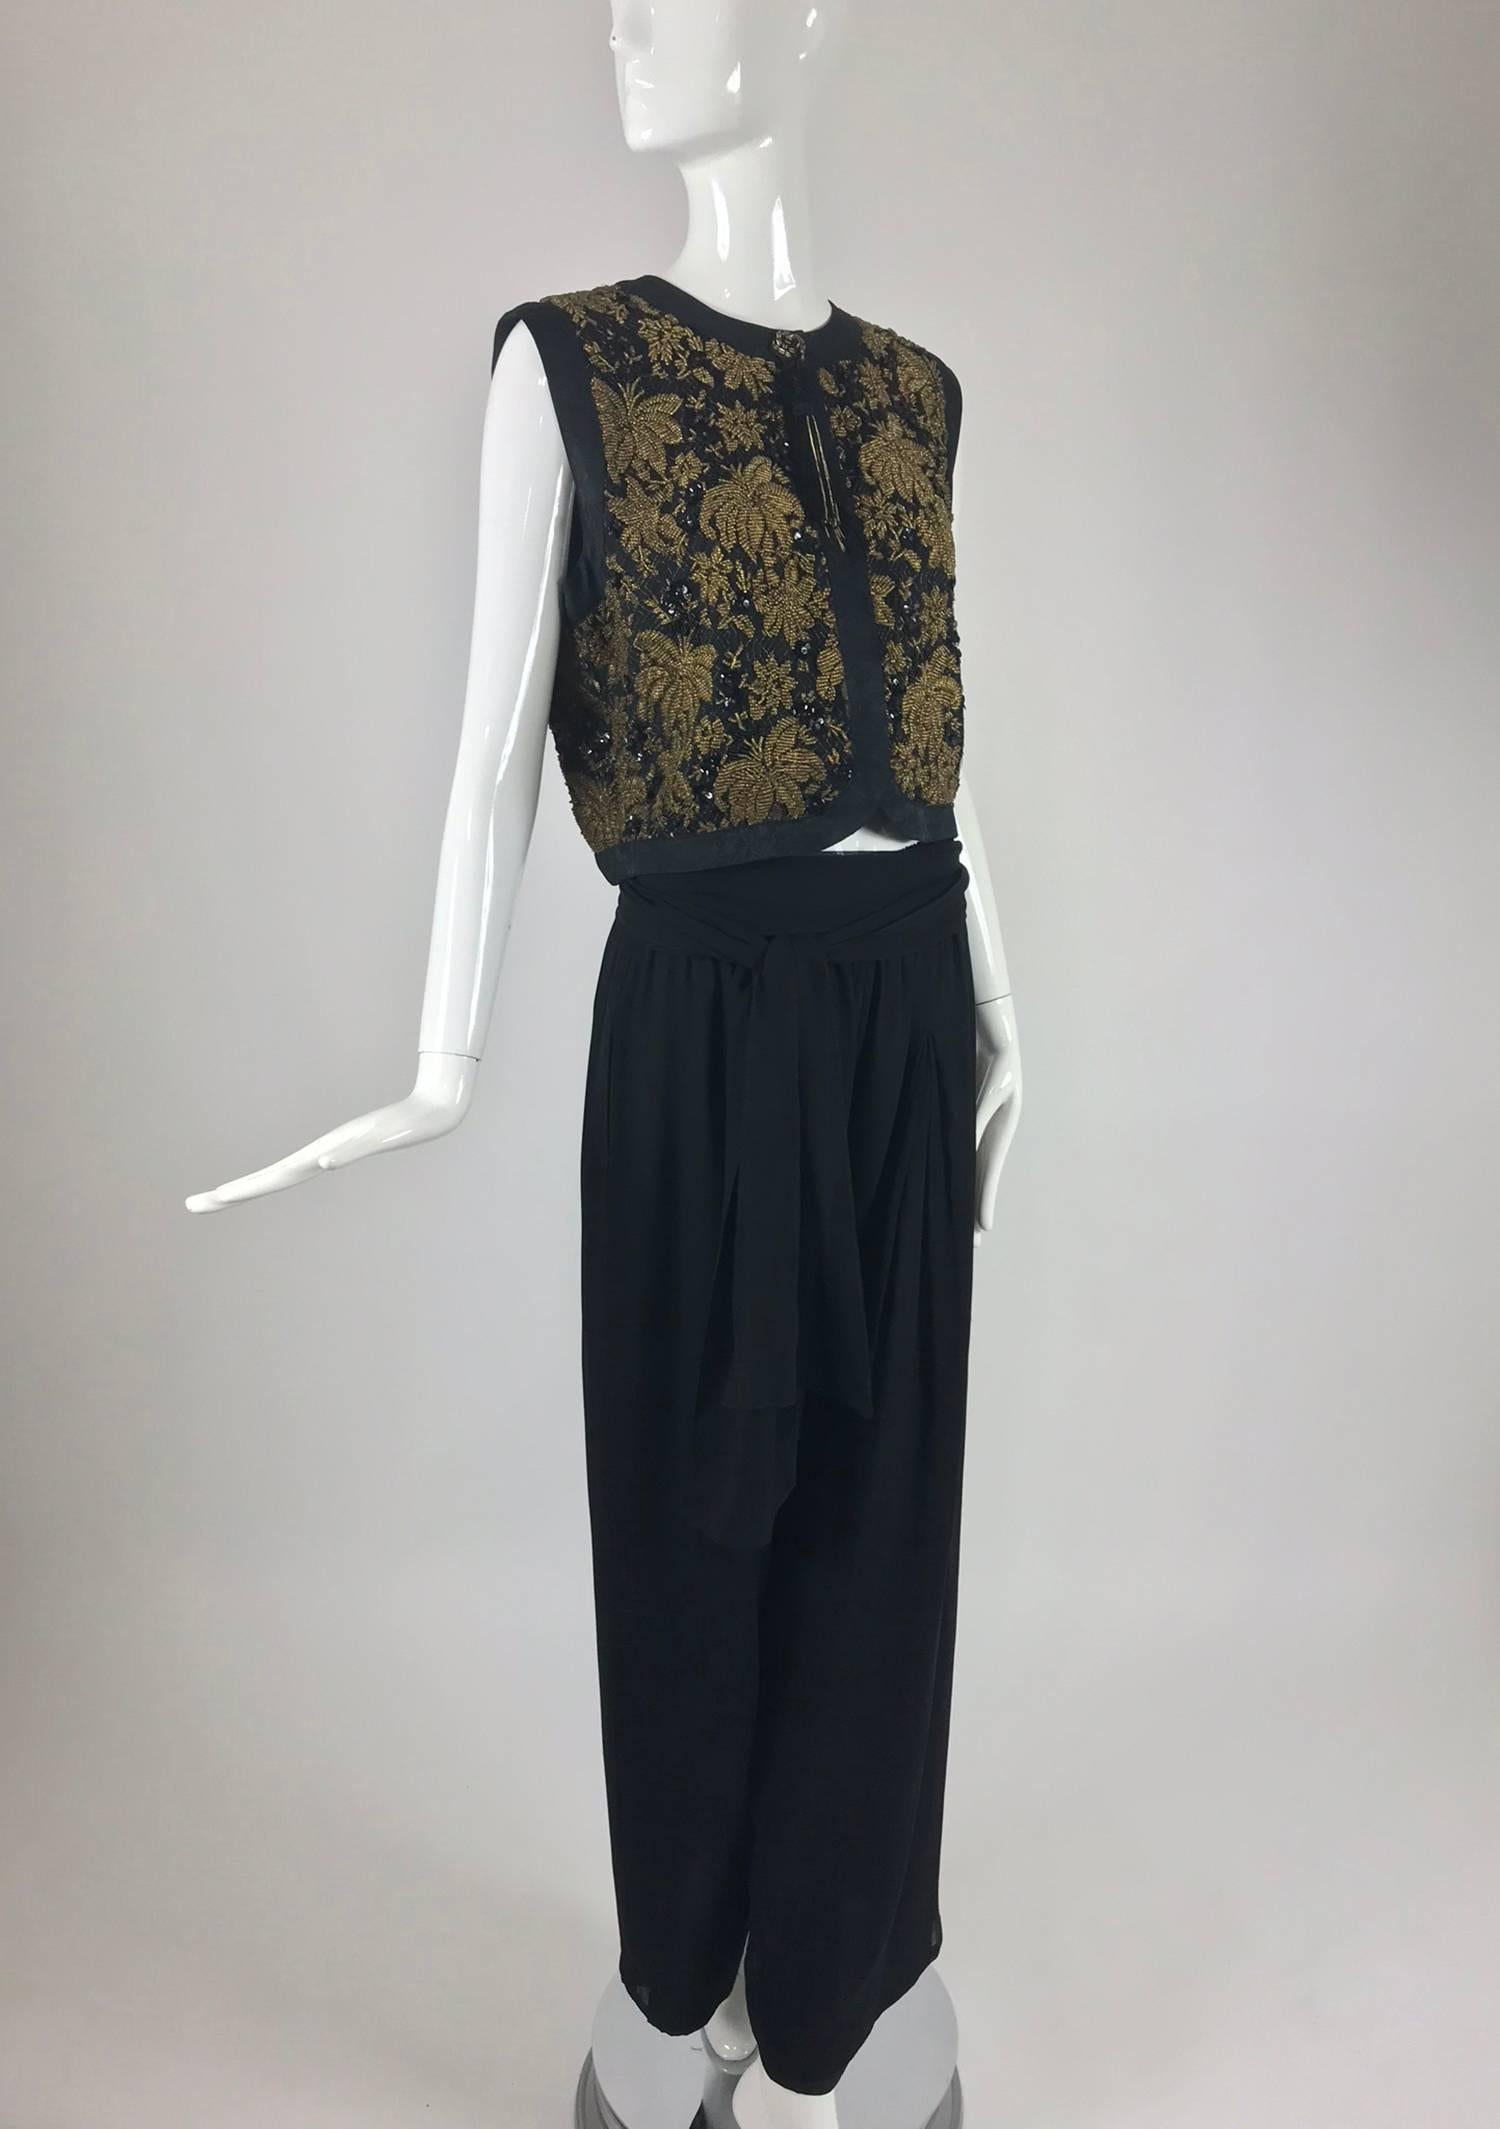 Diane Freis Gold Beaded silk Vest and Full silk Trouser from the 1970s...Gold beaded vest has figured silk facings, fully lined, closes with a hidden snap, there is a beaded tassel at the vest top...Full leg black silk chiffon trouser with smocked